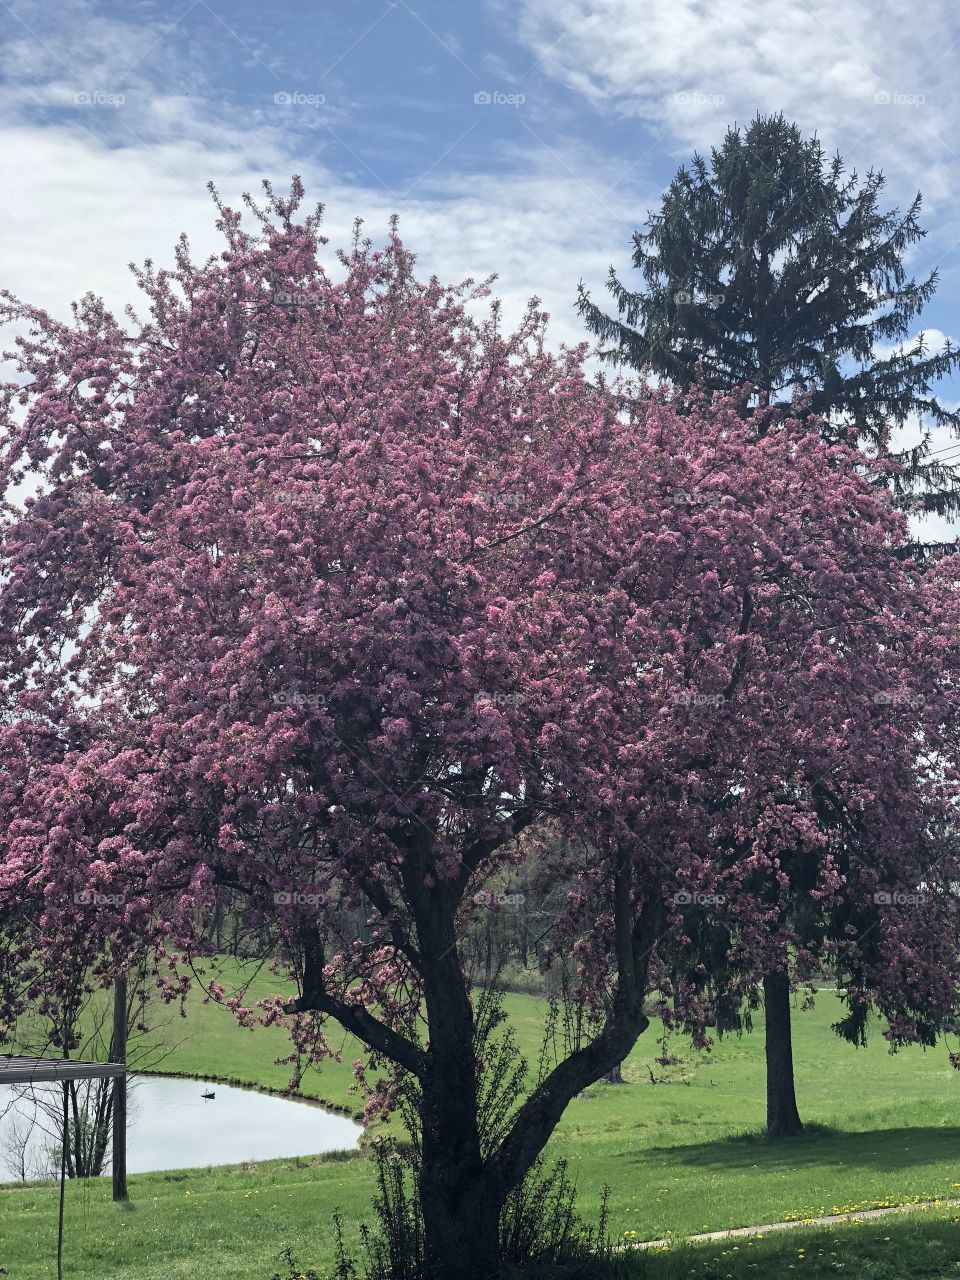 A beautiful crabapple tree on a spring day!